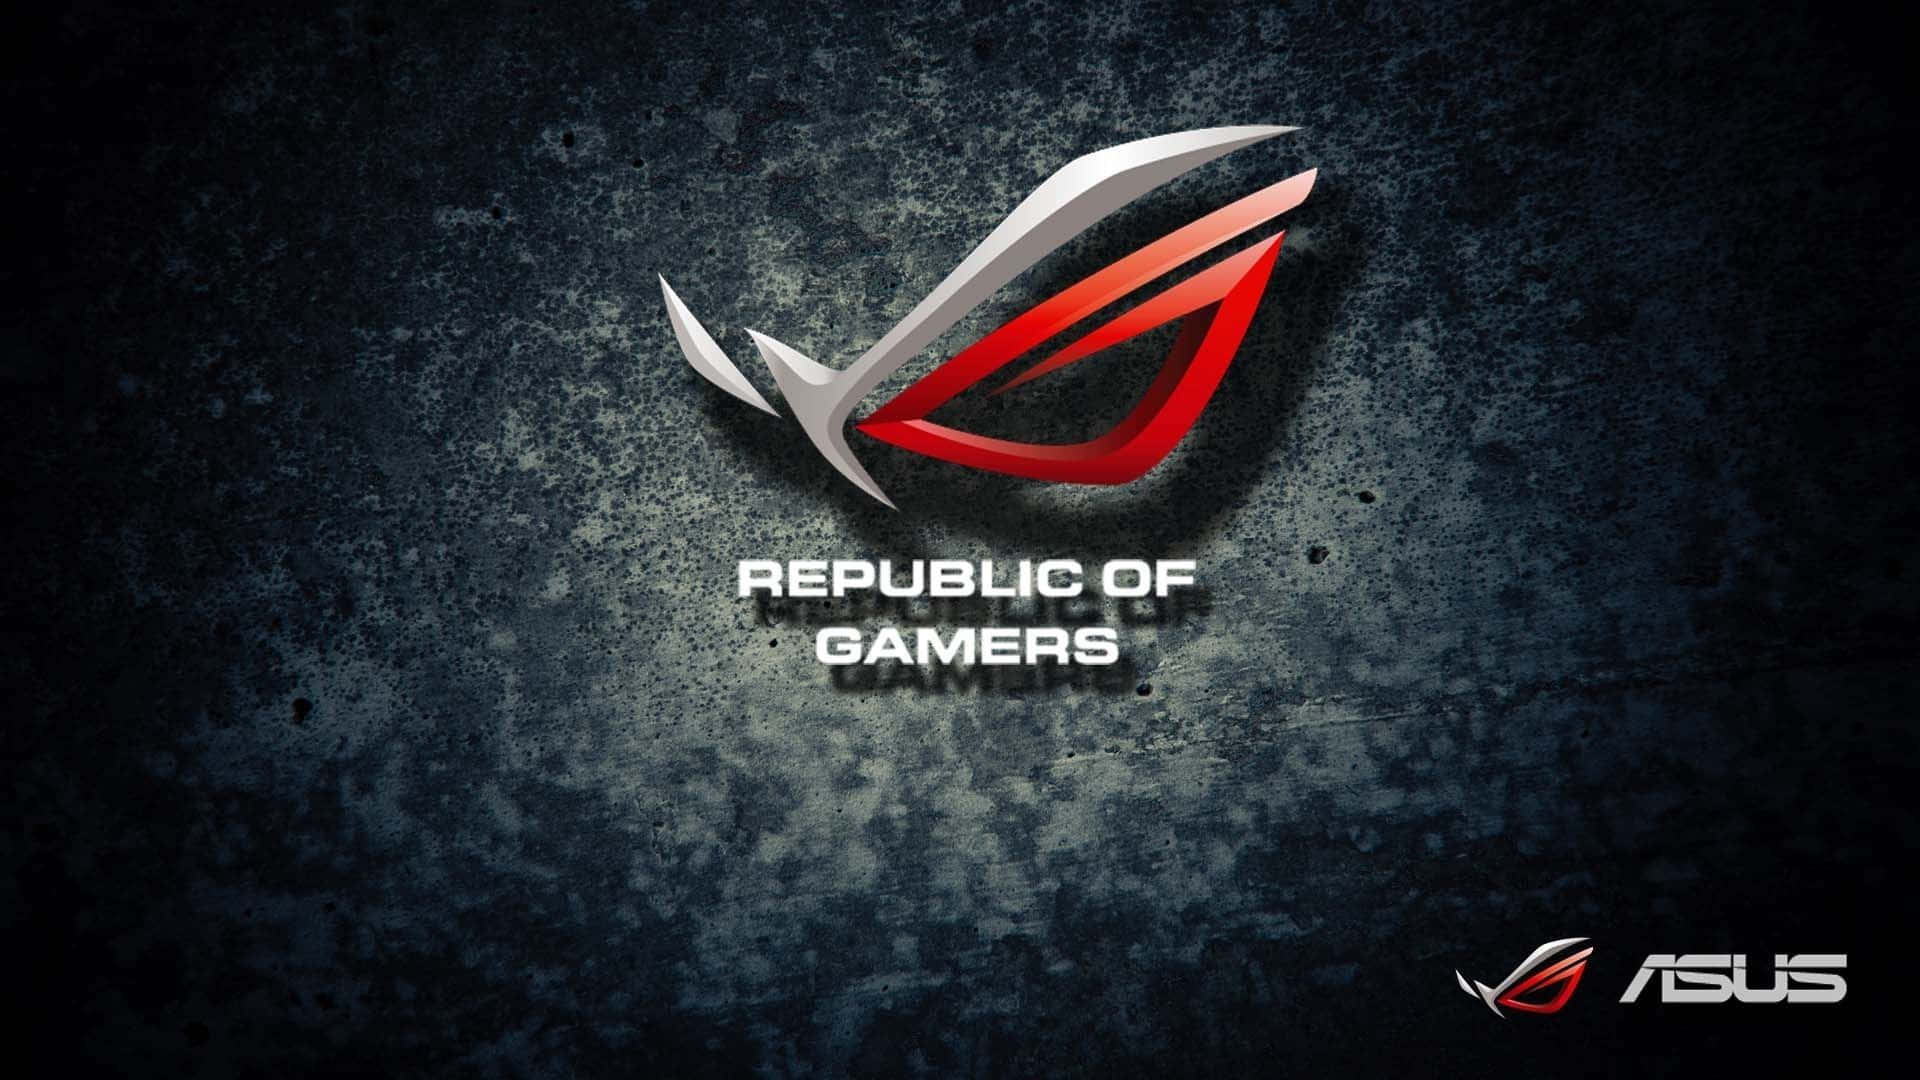 Discover a new world of gaming with the ASUS ROG laptop